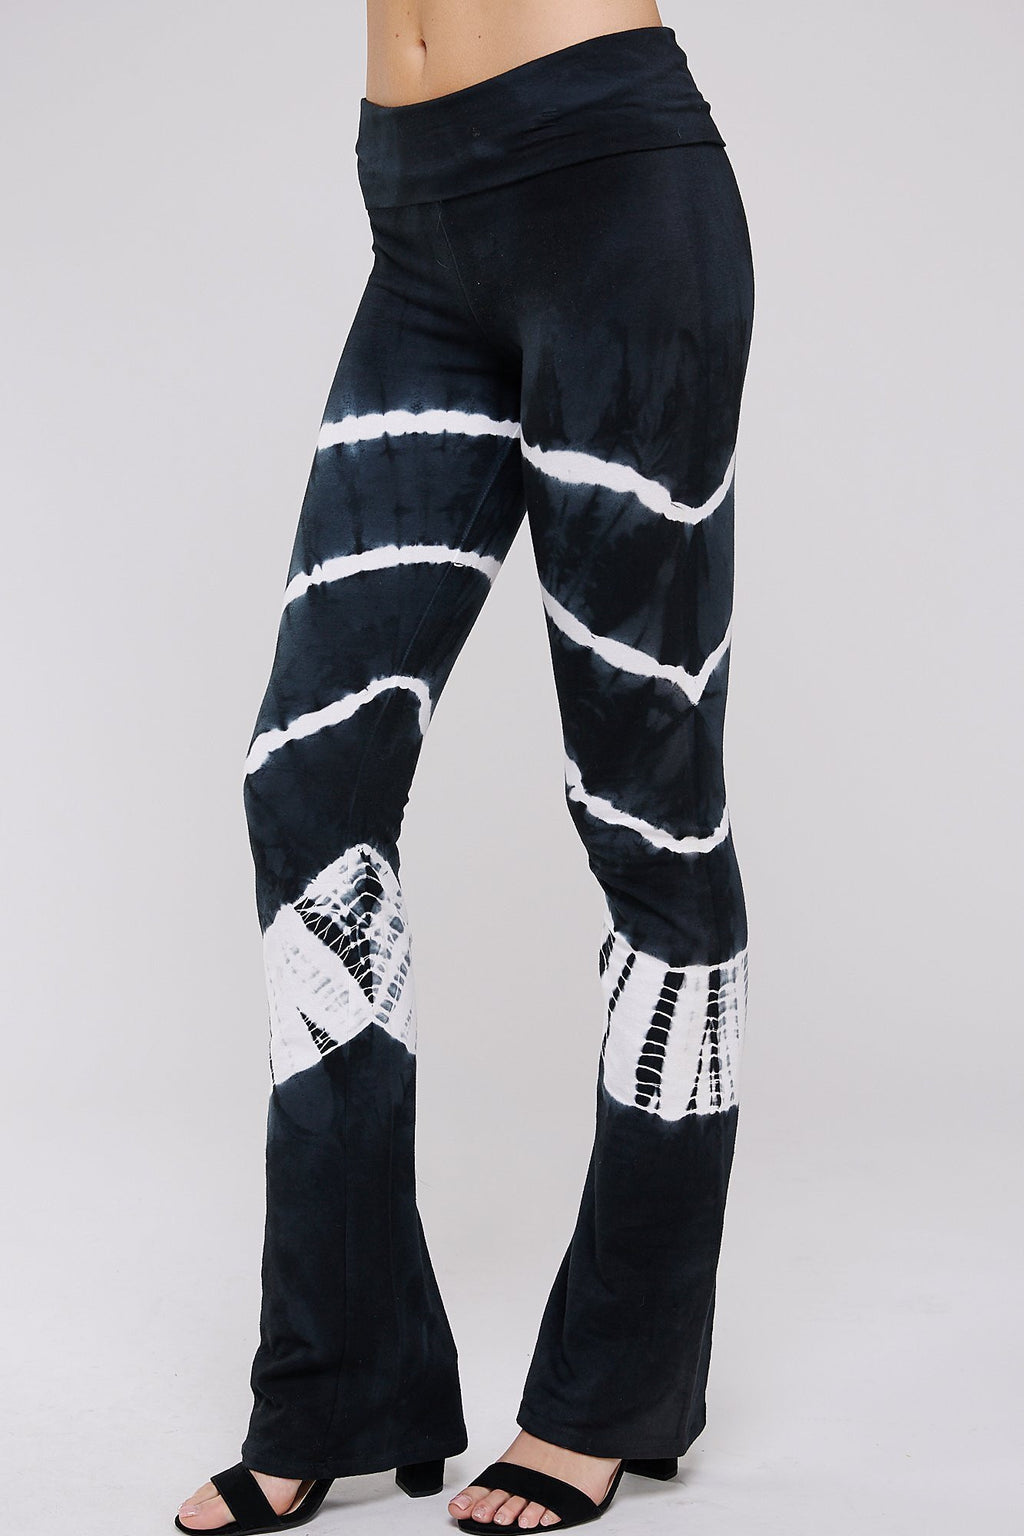 Urban X Black and White Bamboo tie dye Yoga Pant with Fold Over band